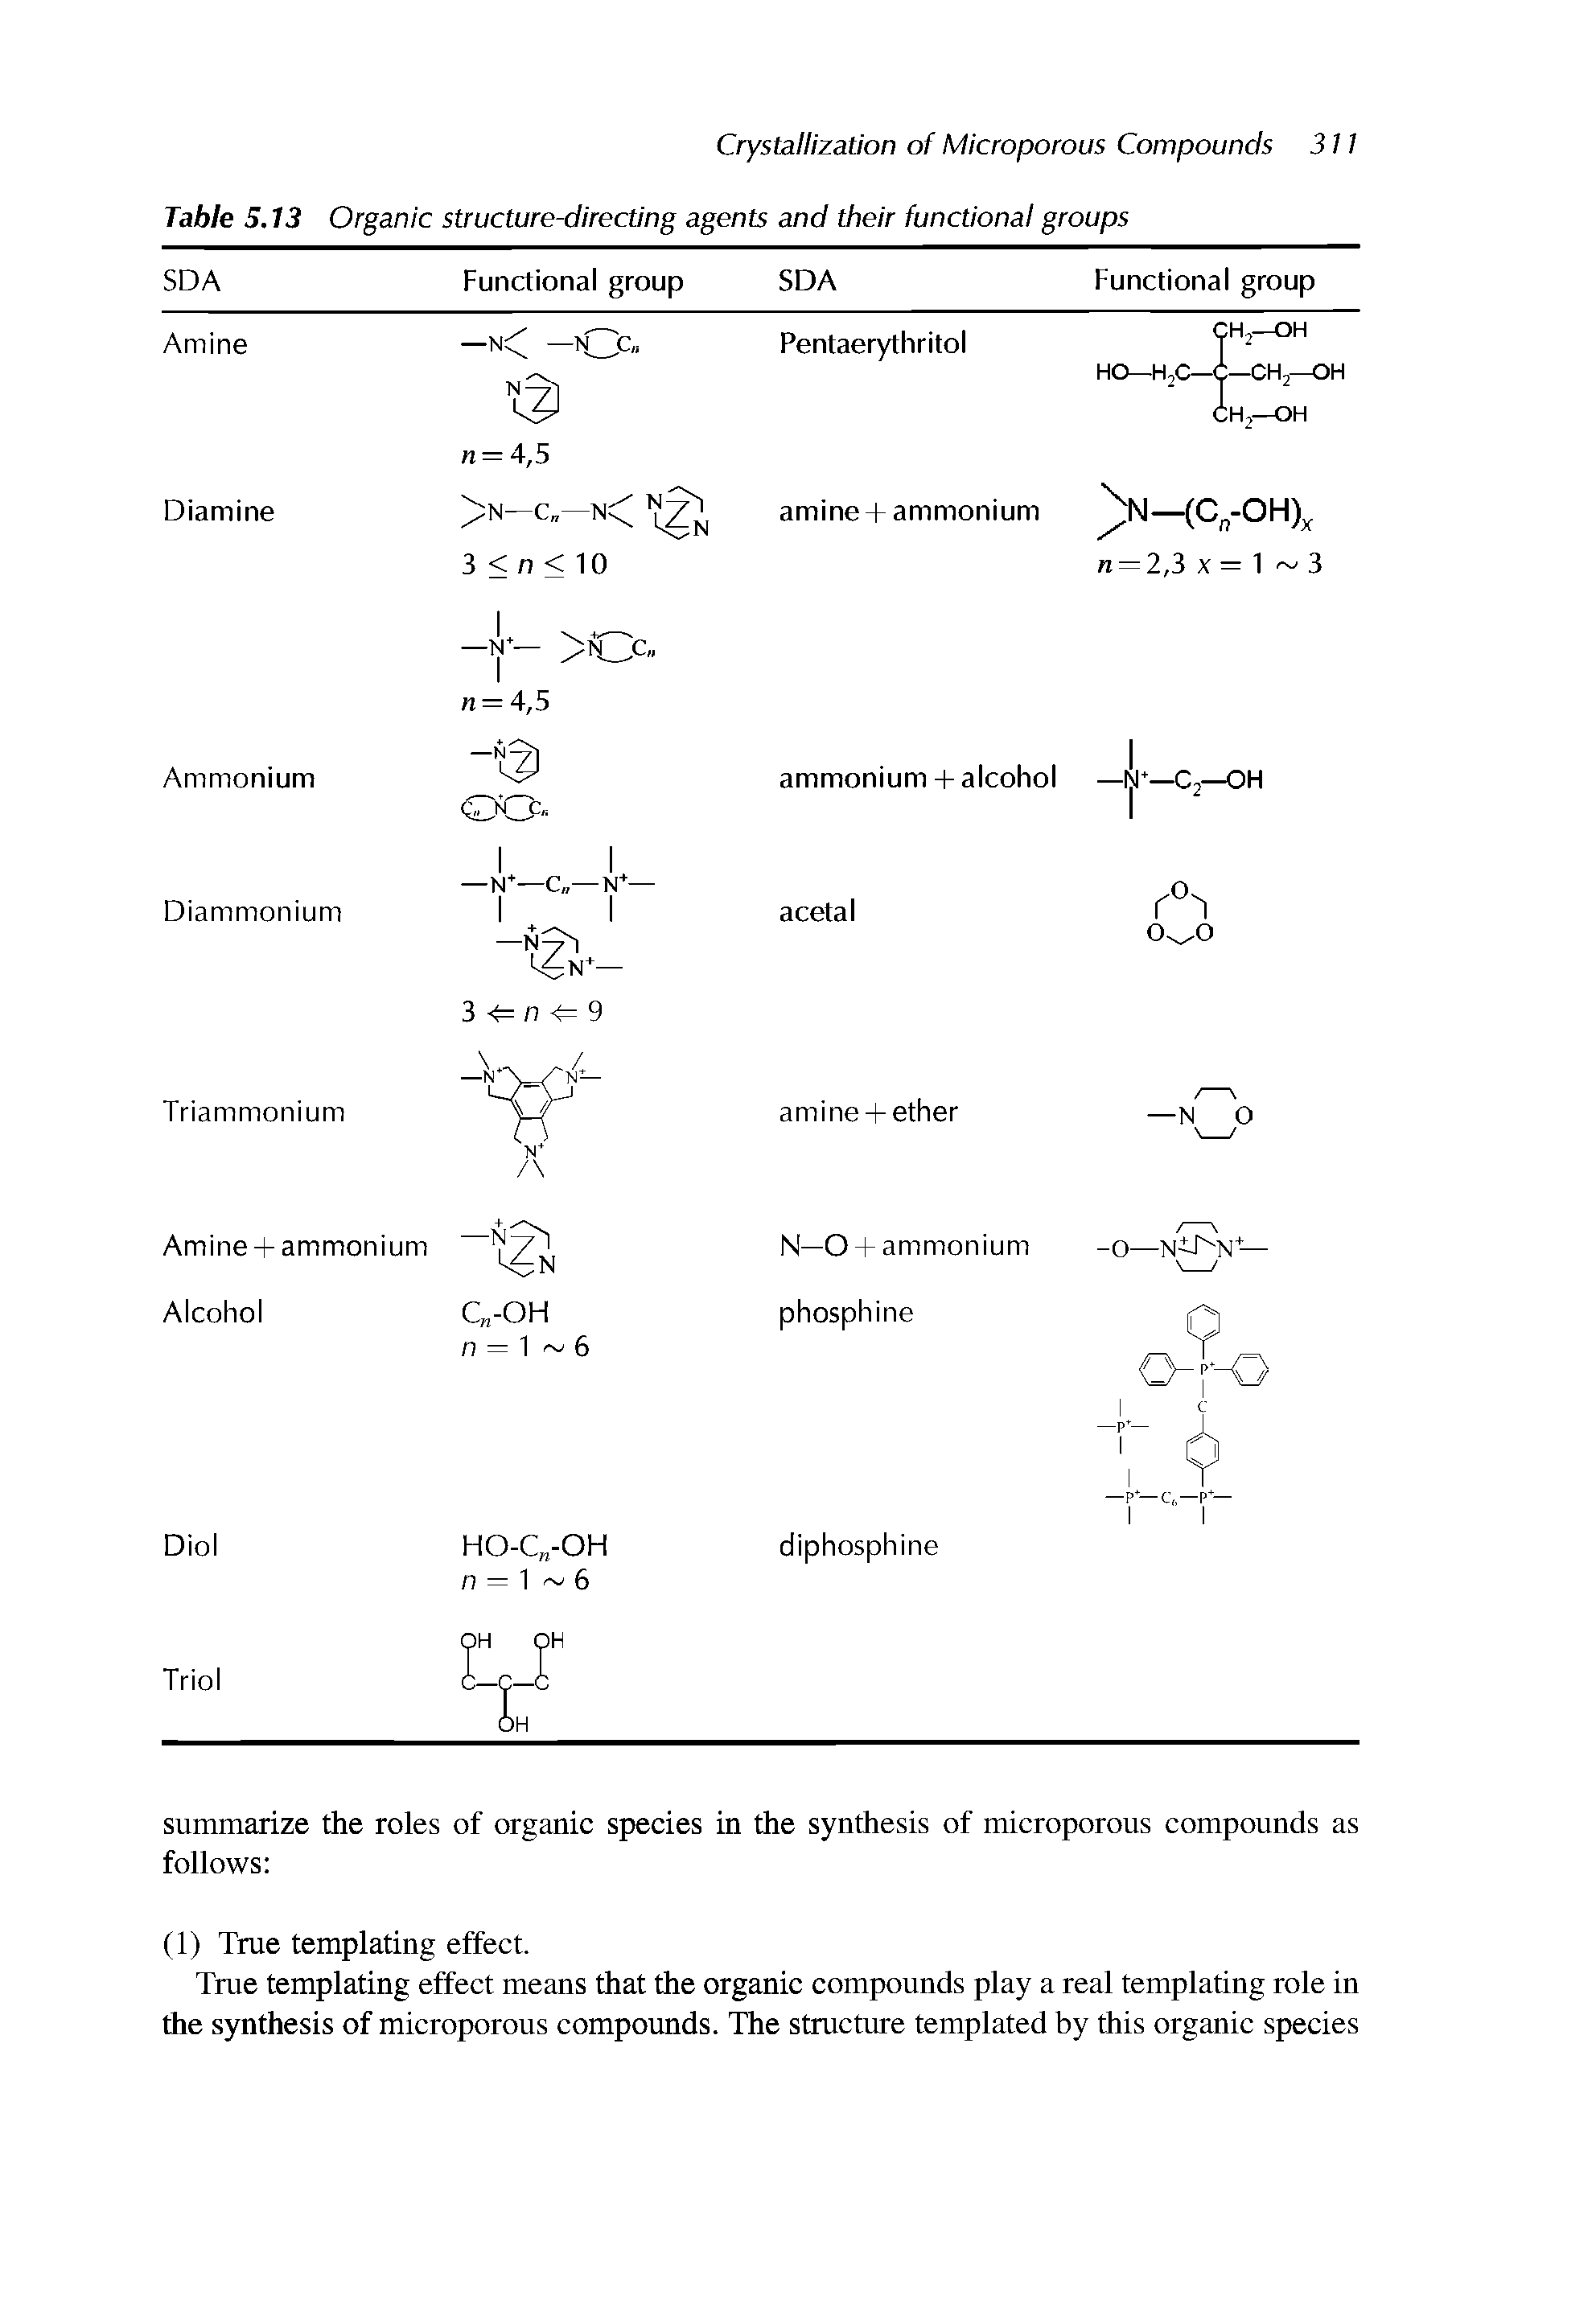 Table 5.13 Organic structure-directing agents and their functional groups...